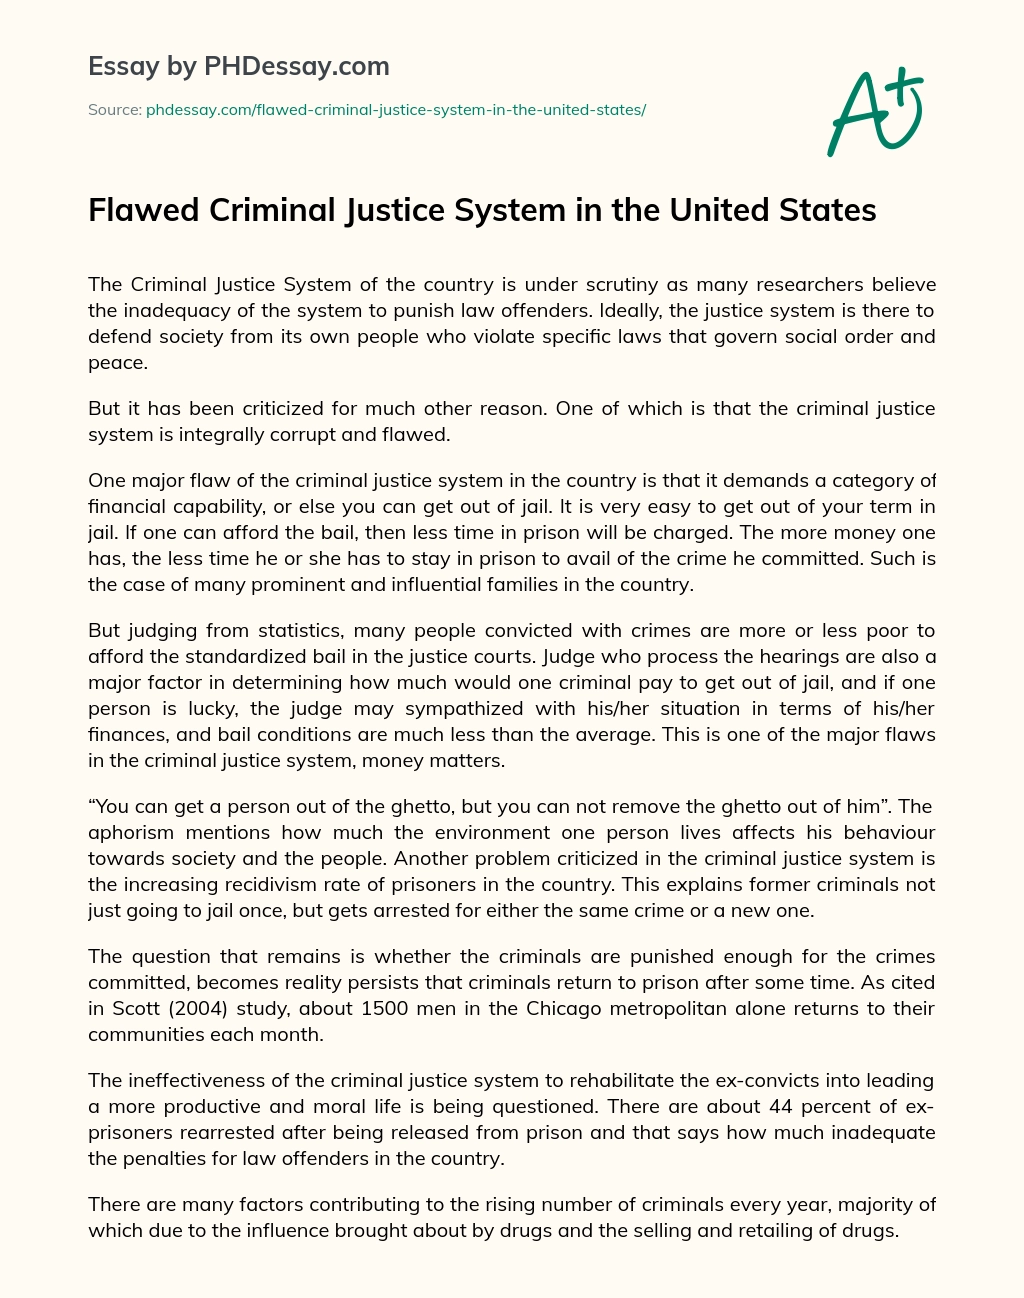 Flawed Criminal Justice System in the United States essay